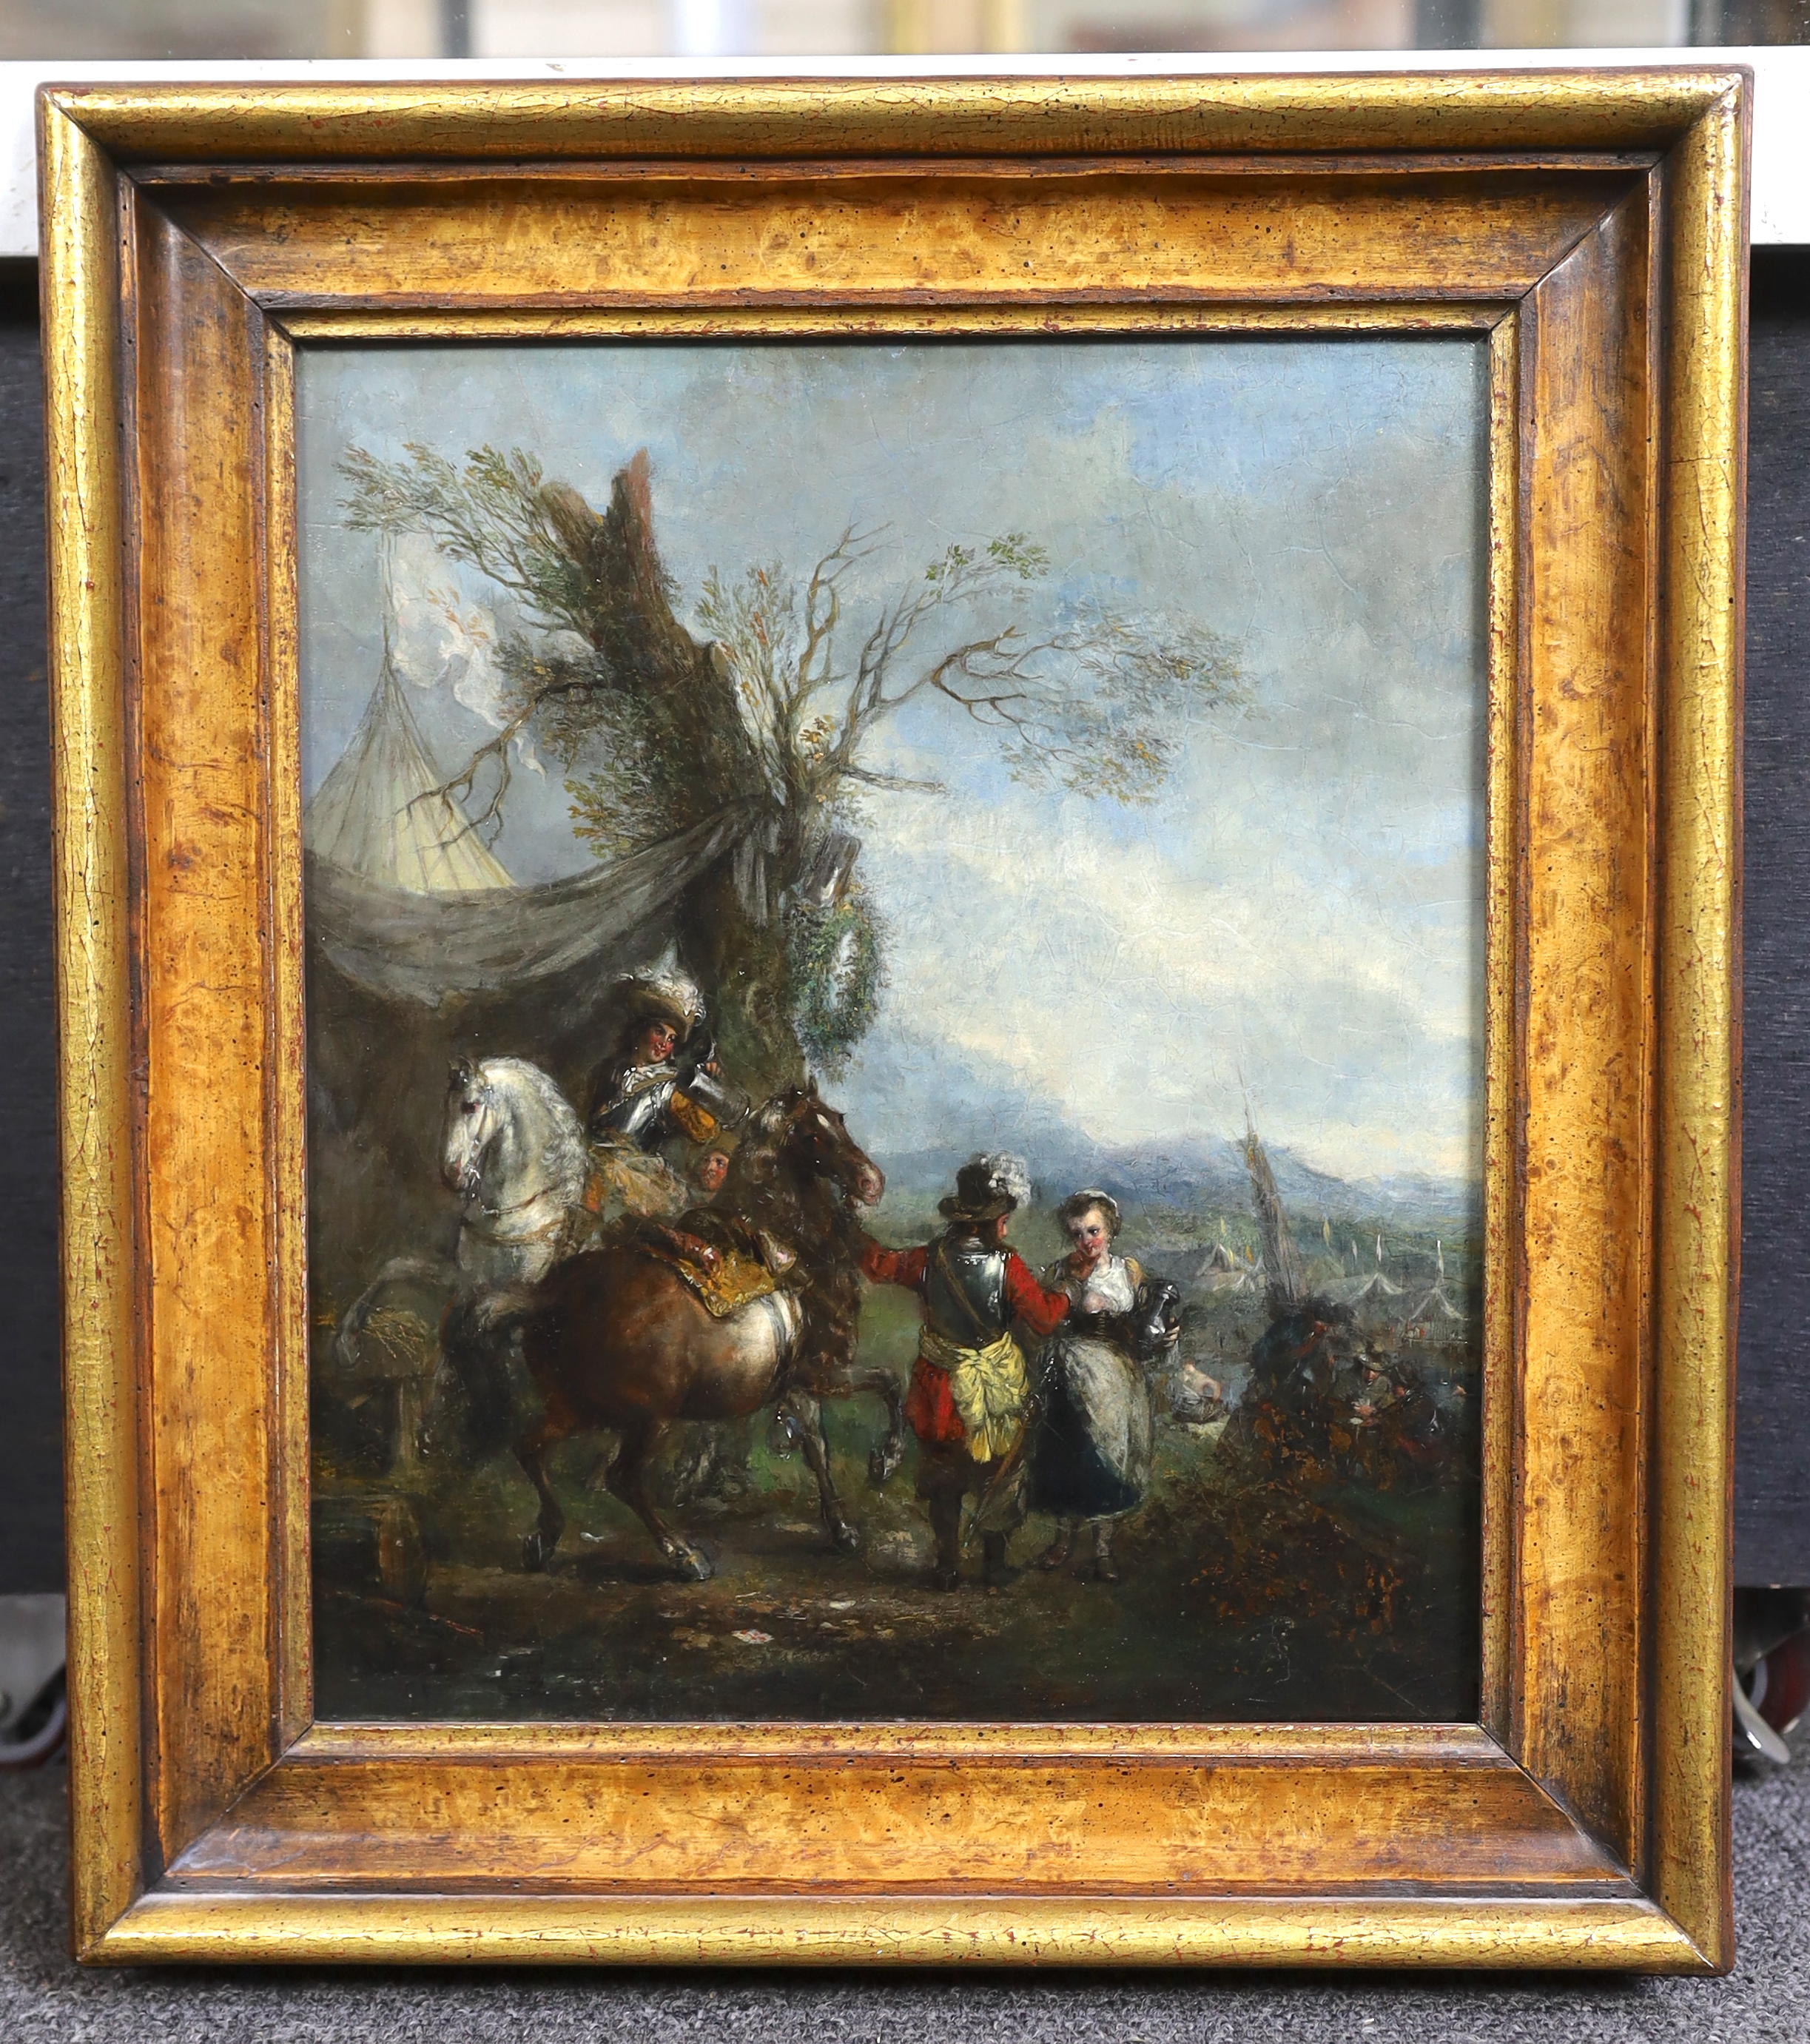 Manner of Philip Wouwerman (Haarlem, 1619-1668), oil on wooden panel, A military encampment with soldiers buying beer from a maid. 30 x 25.5cm. Condition - good